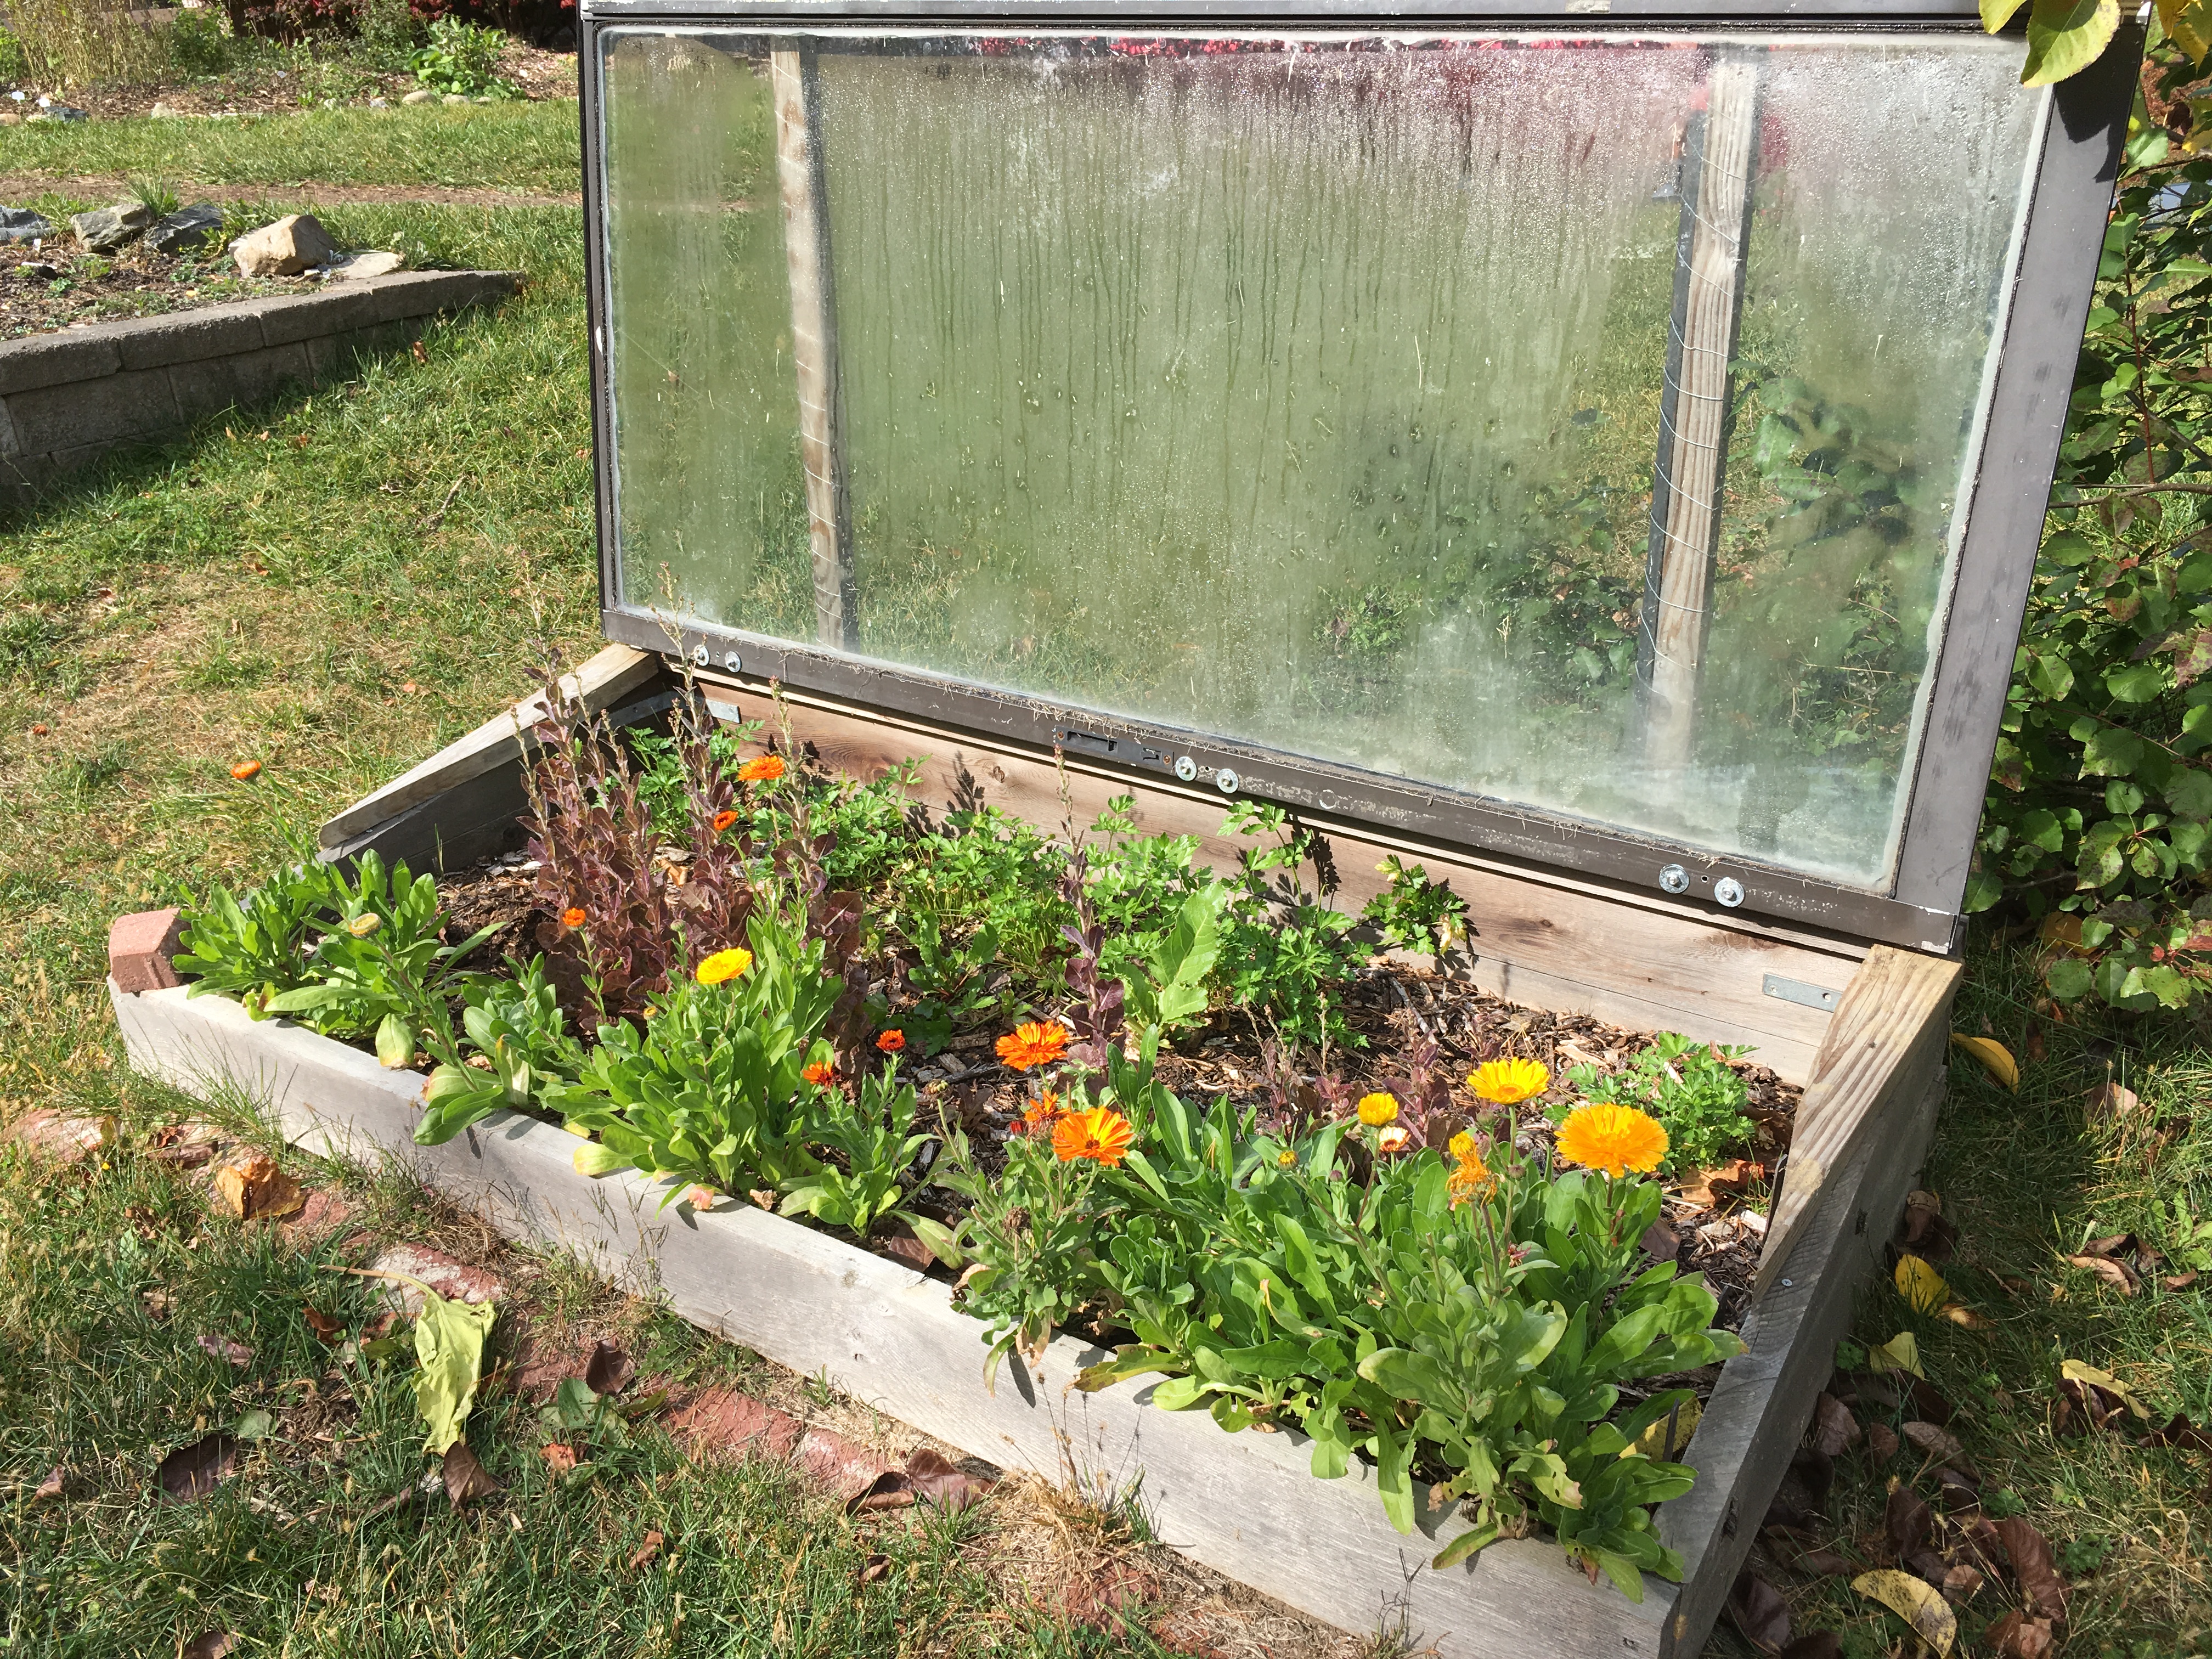 Cold frames to keep plants warm